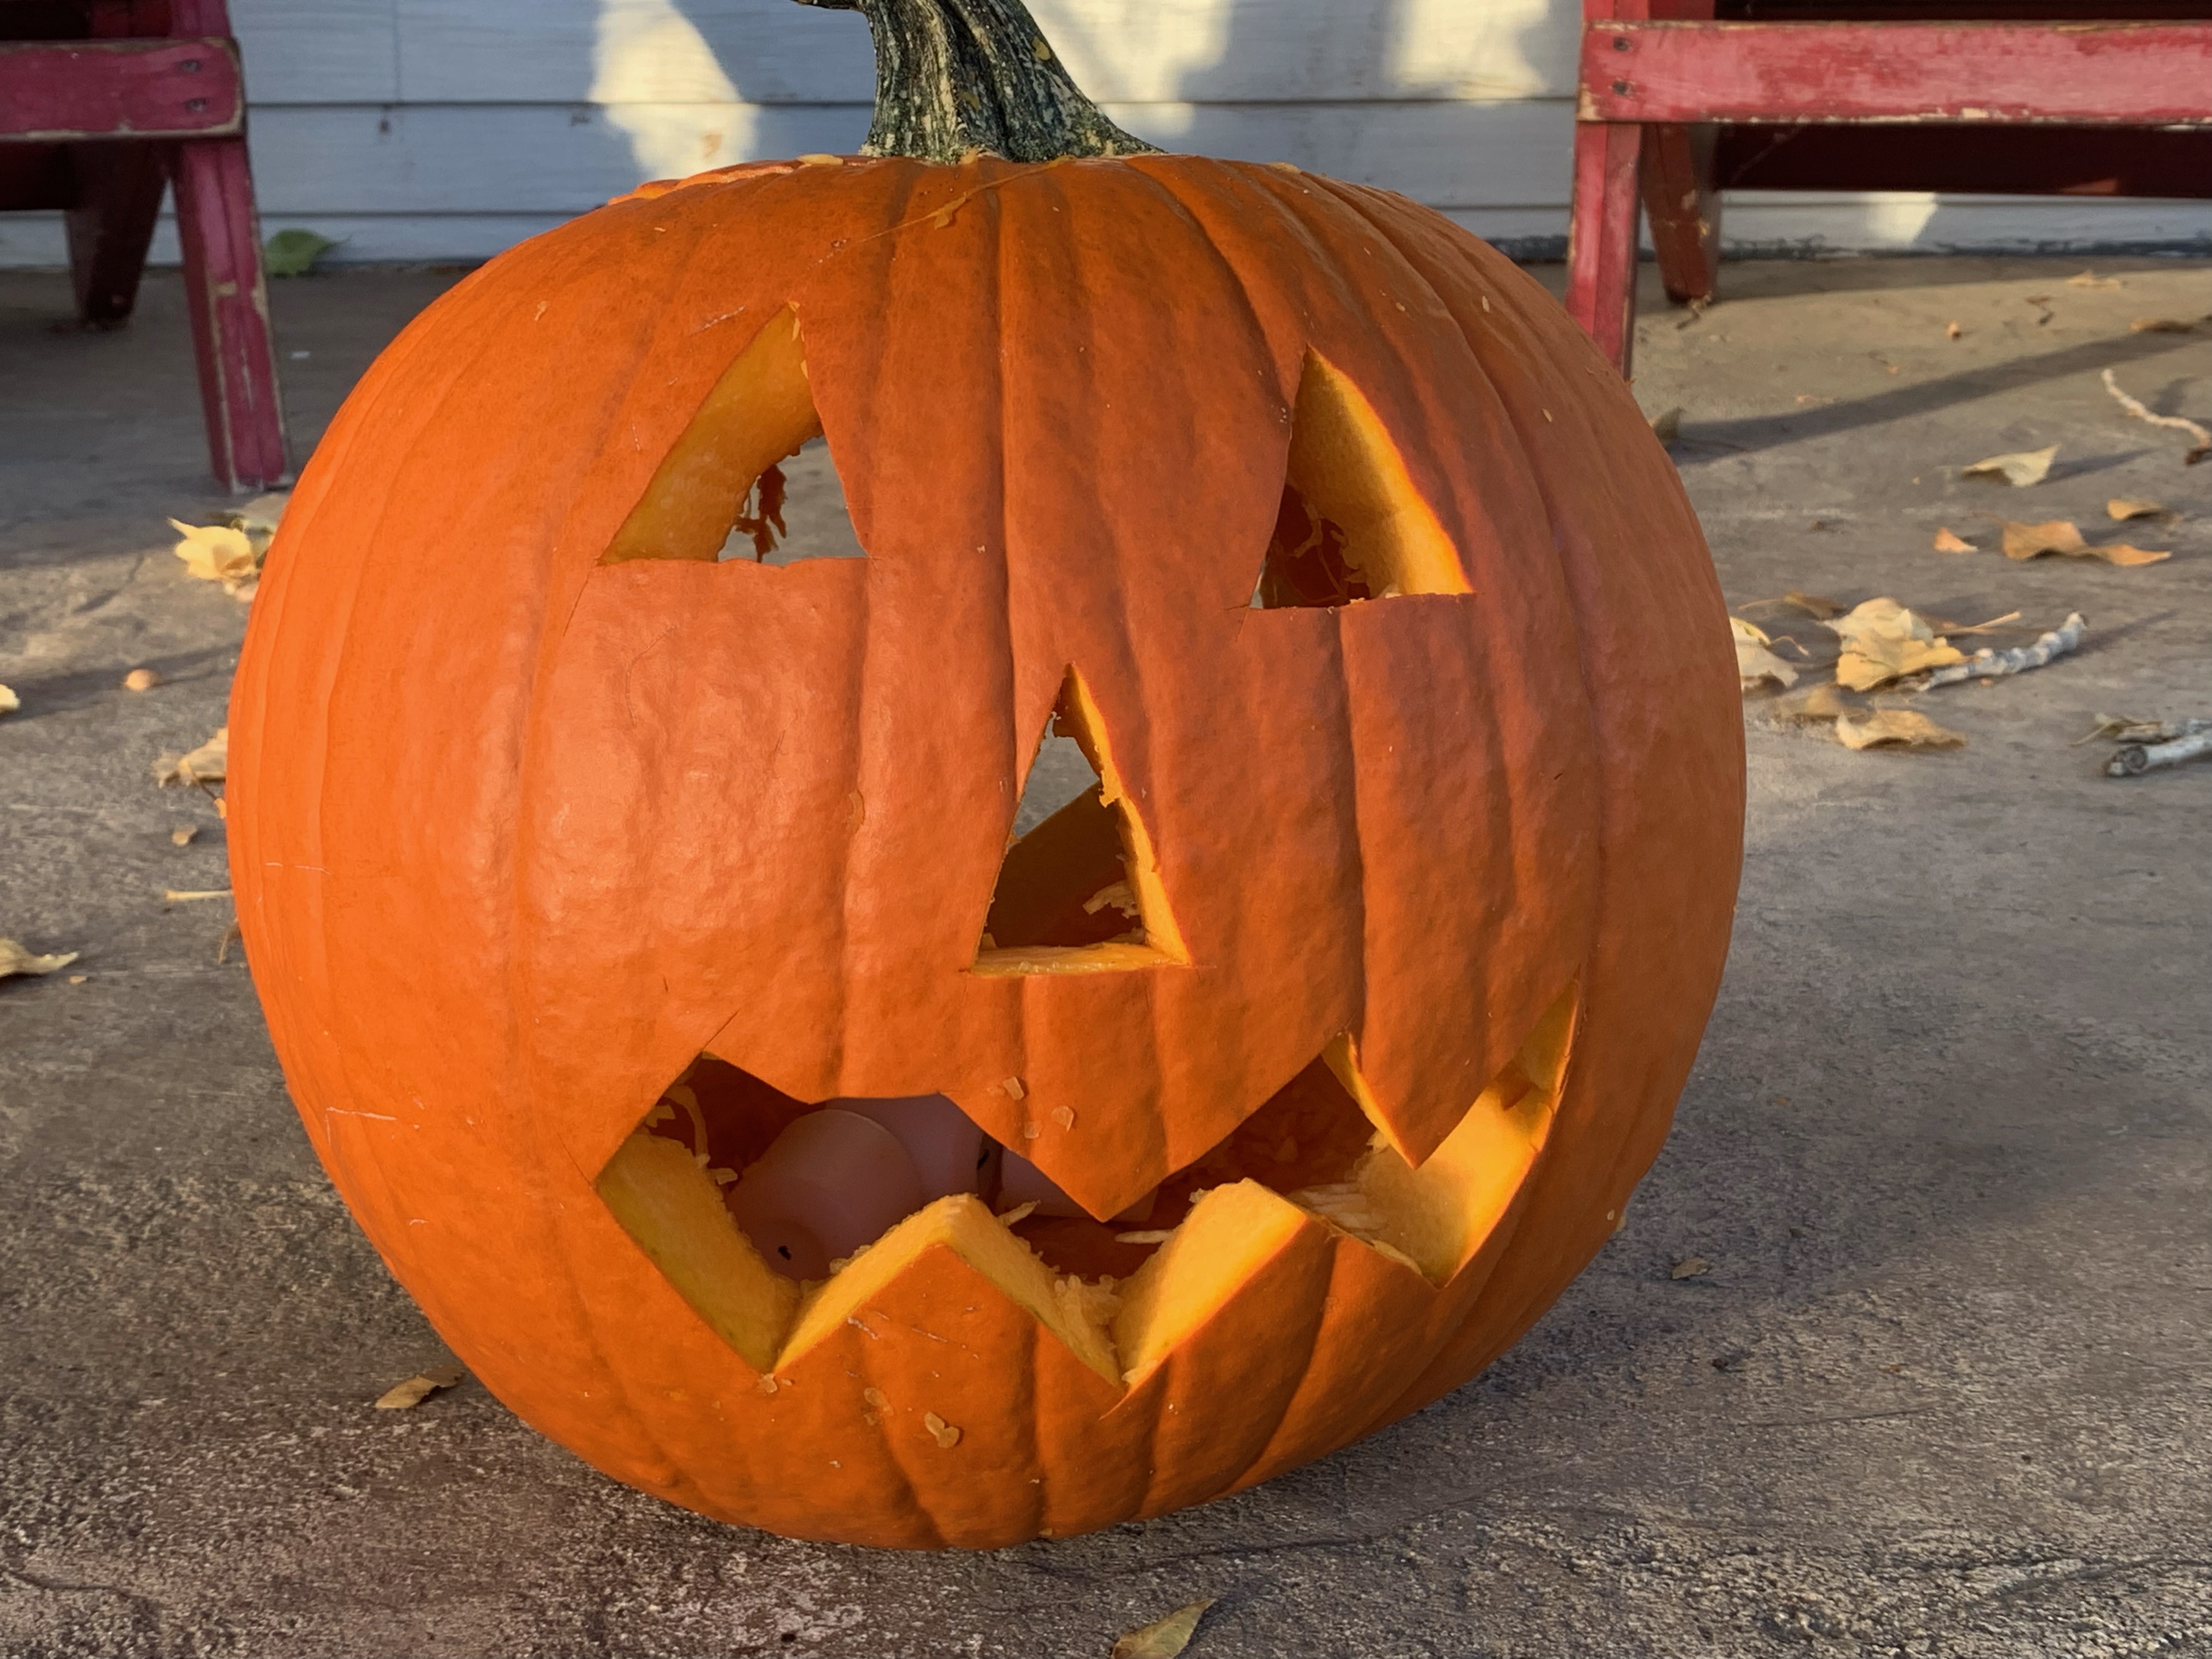 Toss your pumpkins in the trash